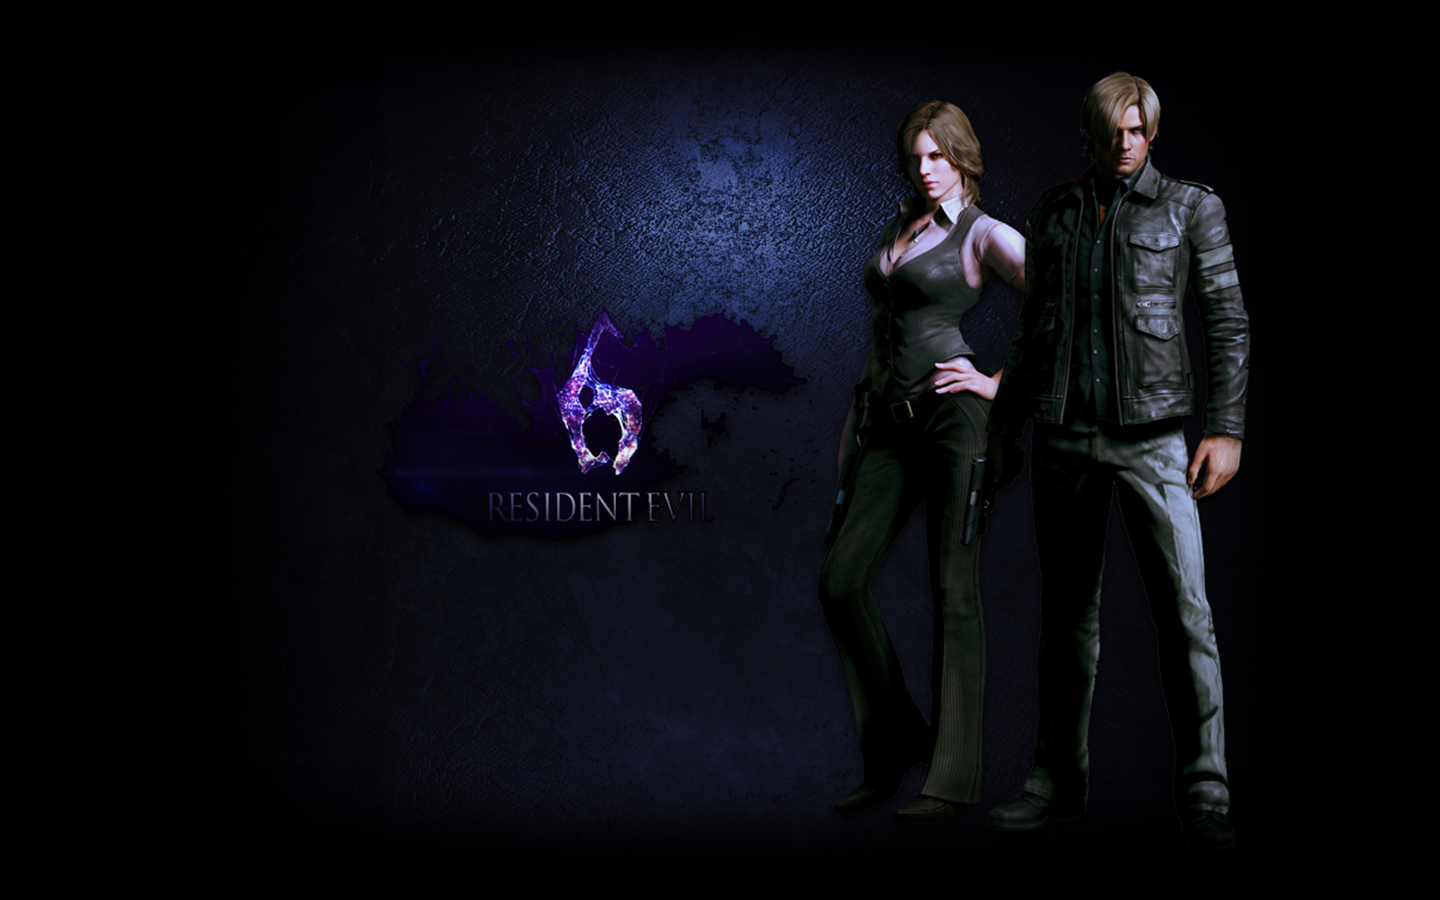 99 Leon Resident Evil 6 Wallpapers On Wallpapersafari Images, Photos, Reviews